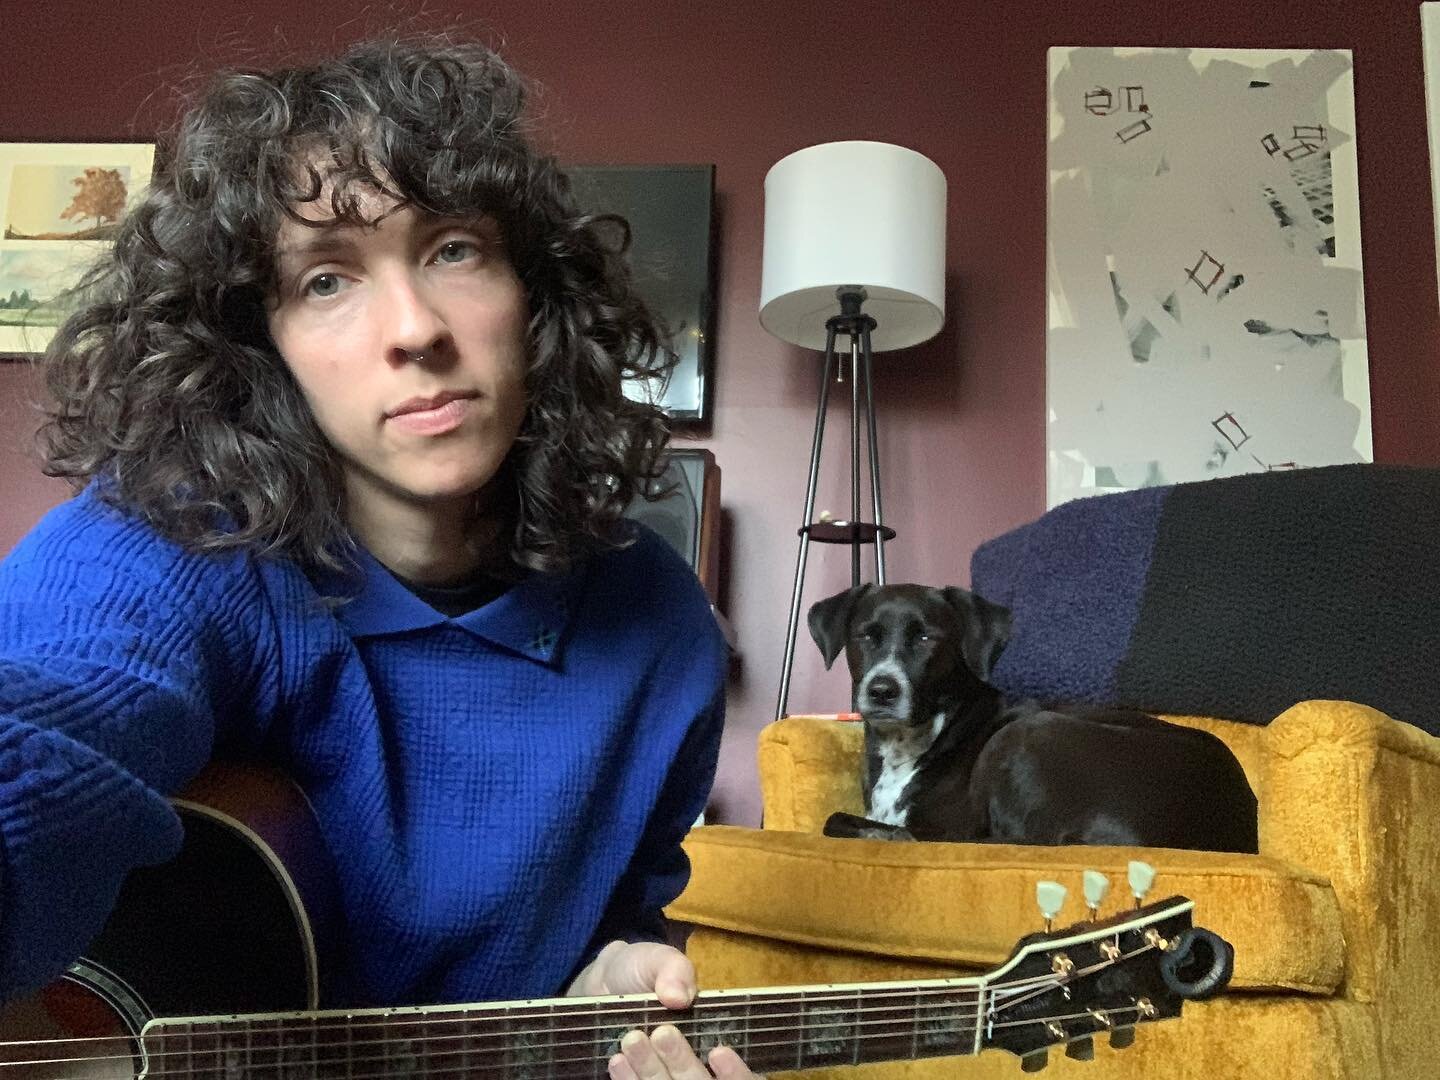 shared a new live video on my @patreon today AND we&rsquo;re playin a live show tonight at @theblueroomnashville opening for @jake.botts !! 8pm sharp 

link to join my patreon community for the full vid in my bio/stories - find out if i put dis pup t